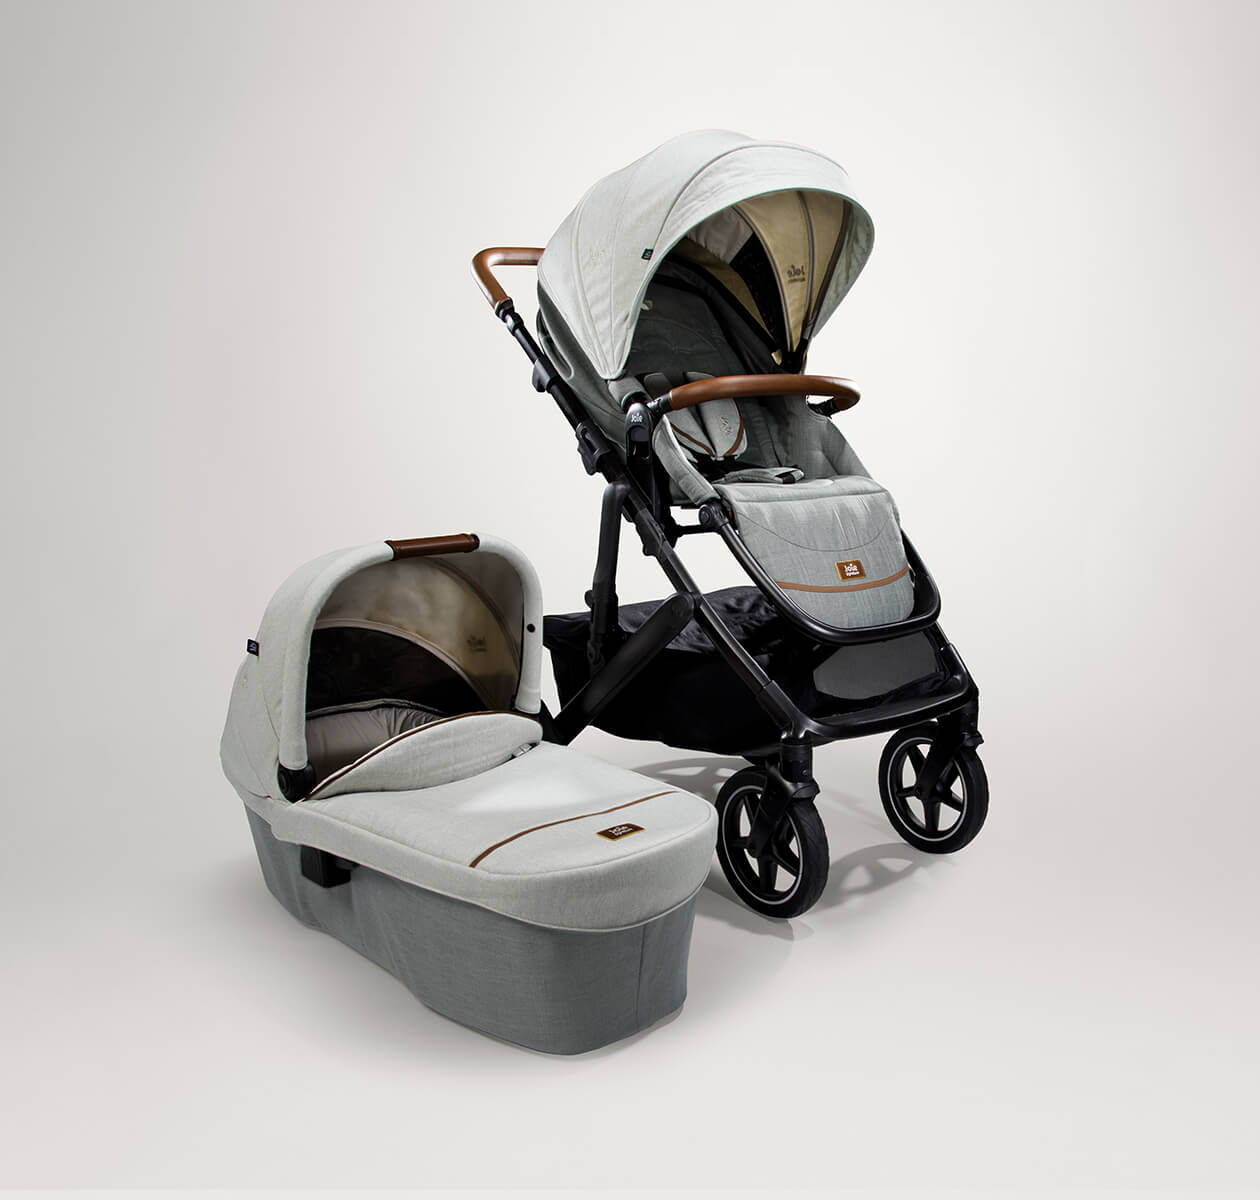 Joie signature vinca pram and ramble XL carry cot in gray at an angle 